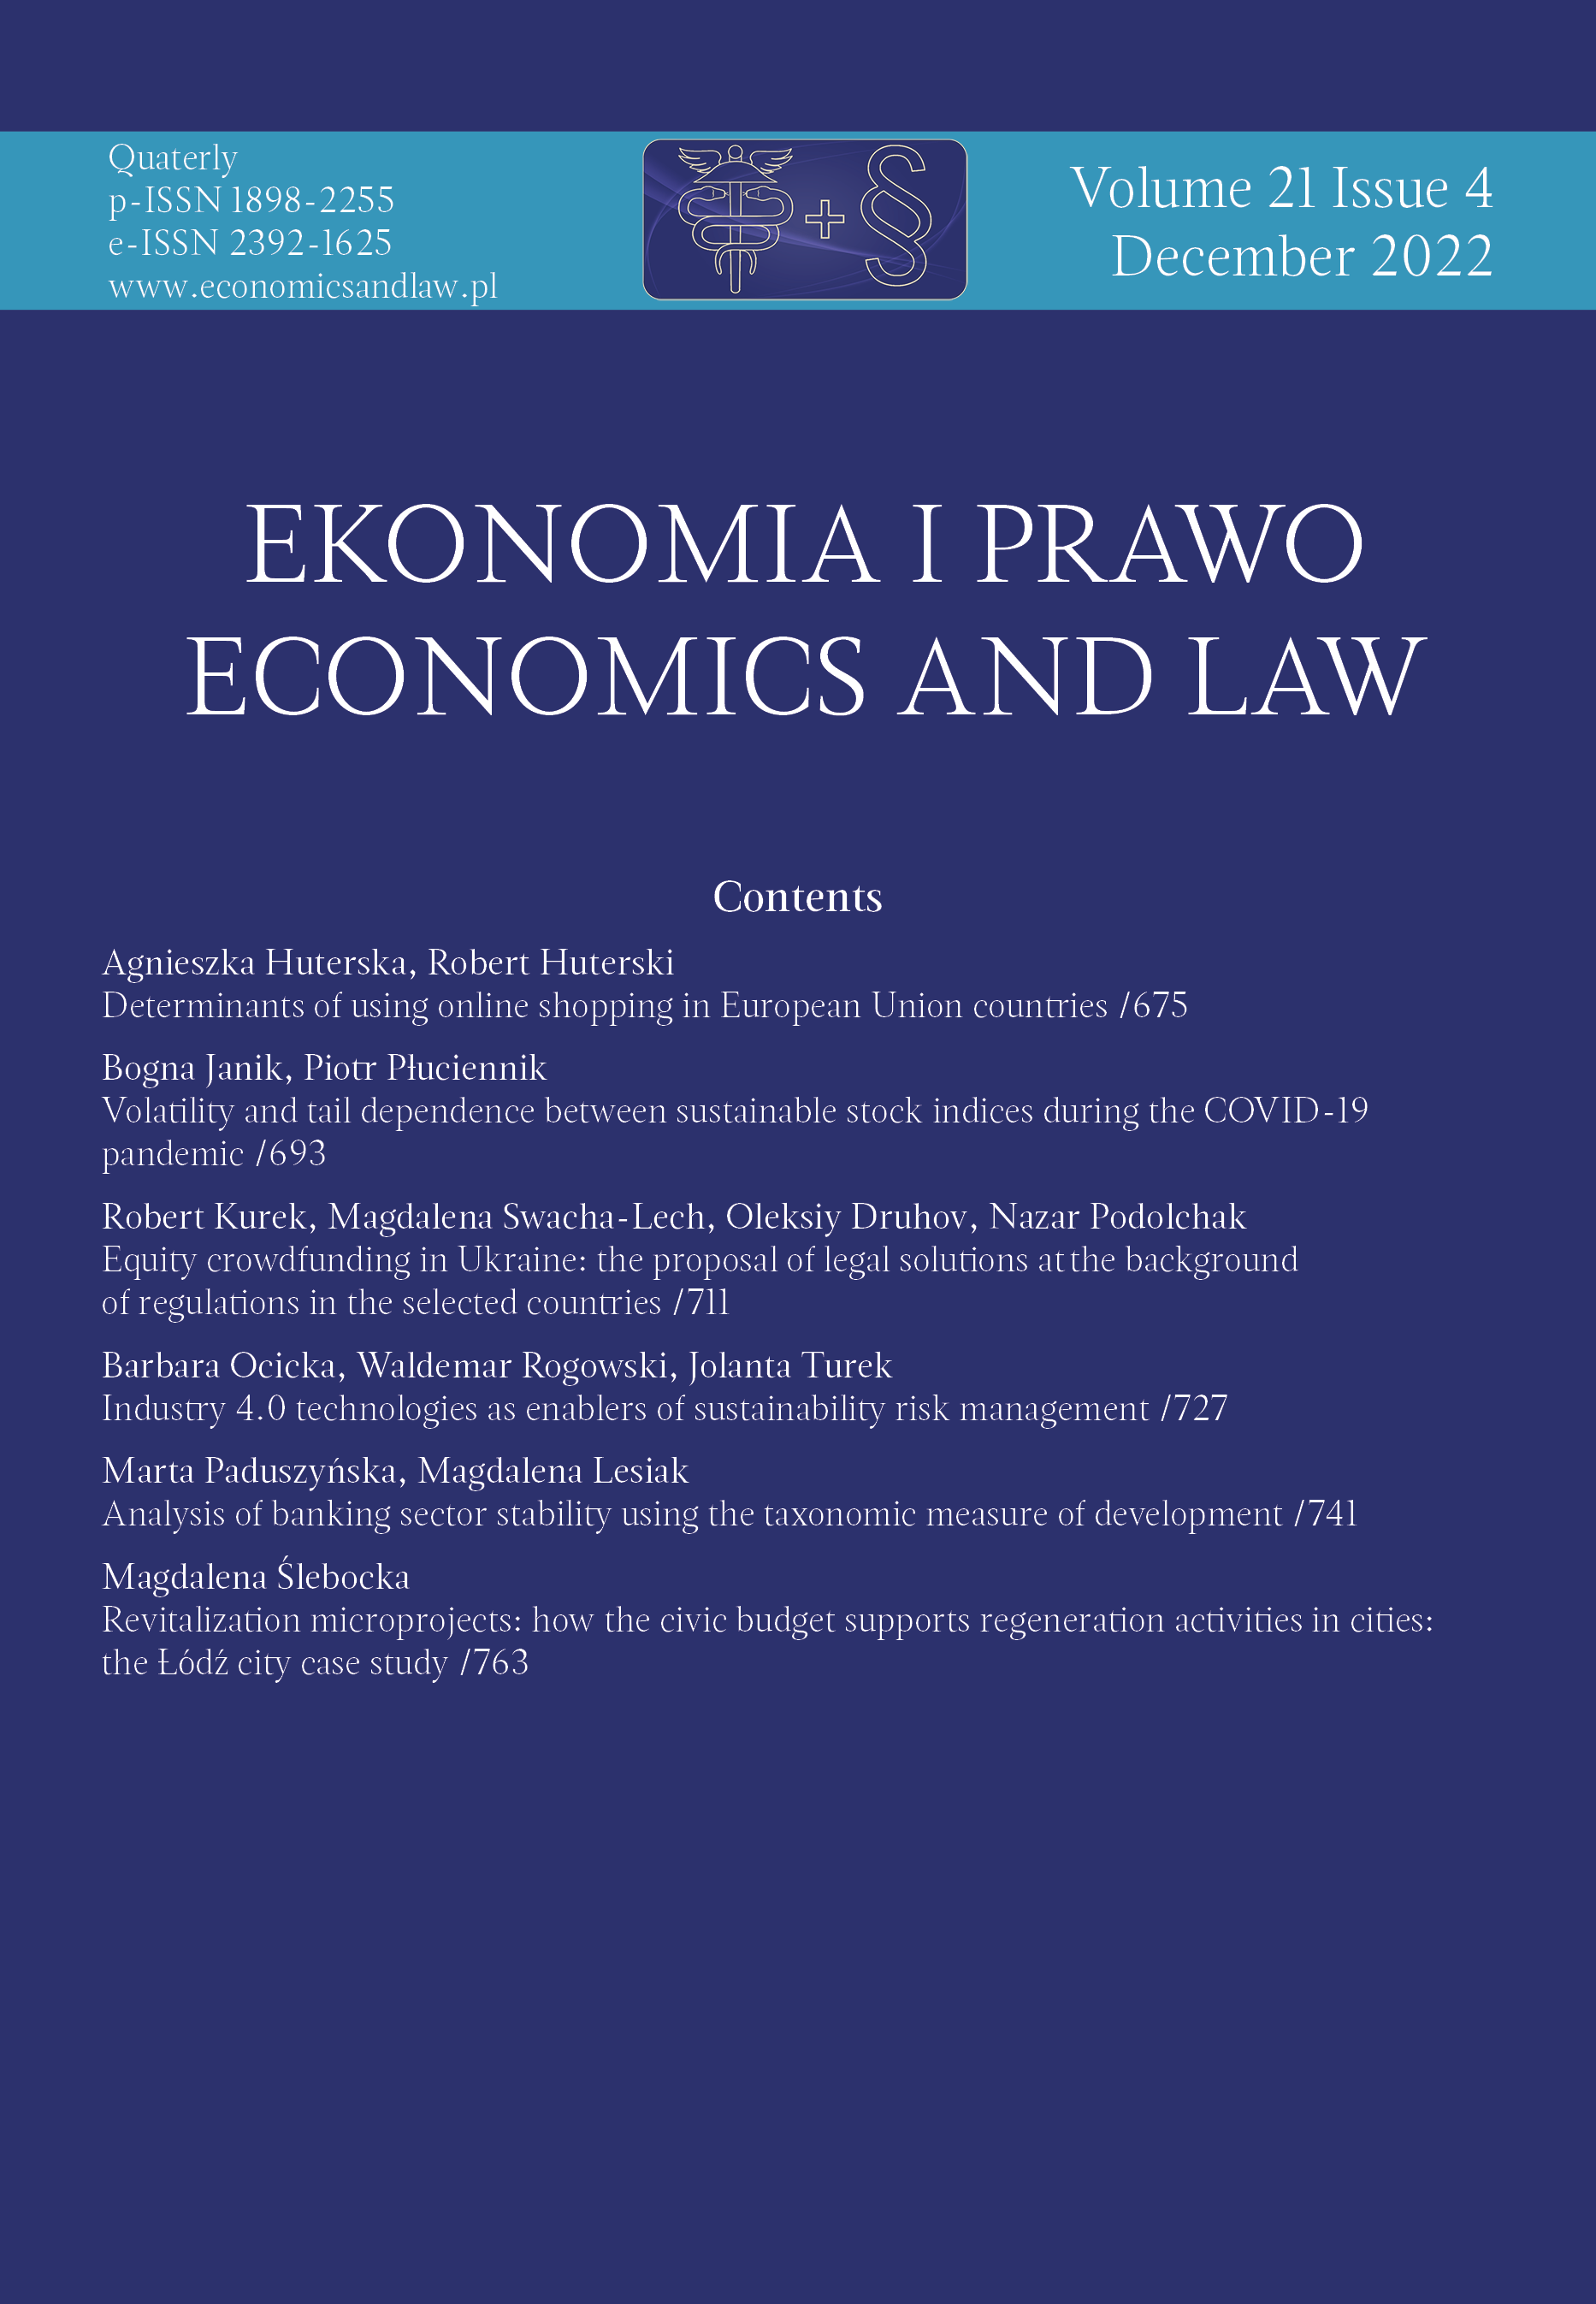 Analysis of banking sector stability using the taxonomic measure of development